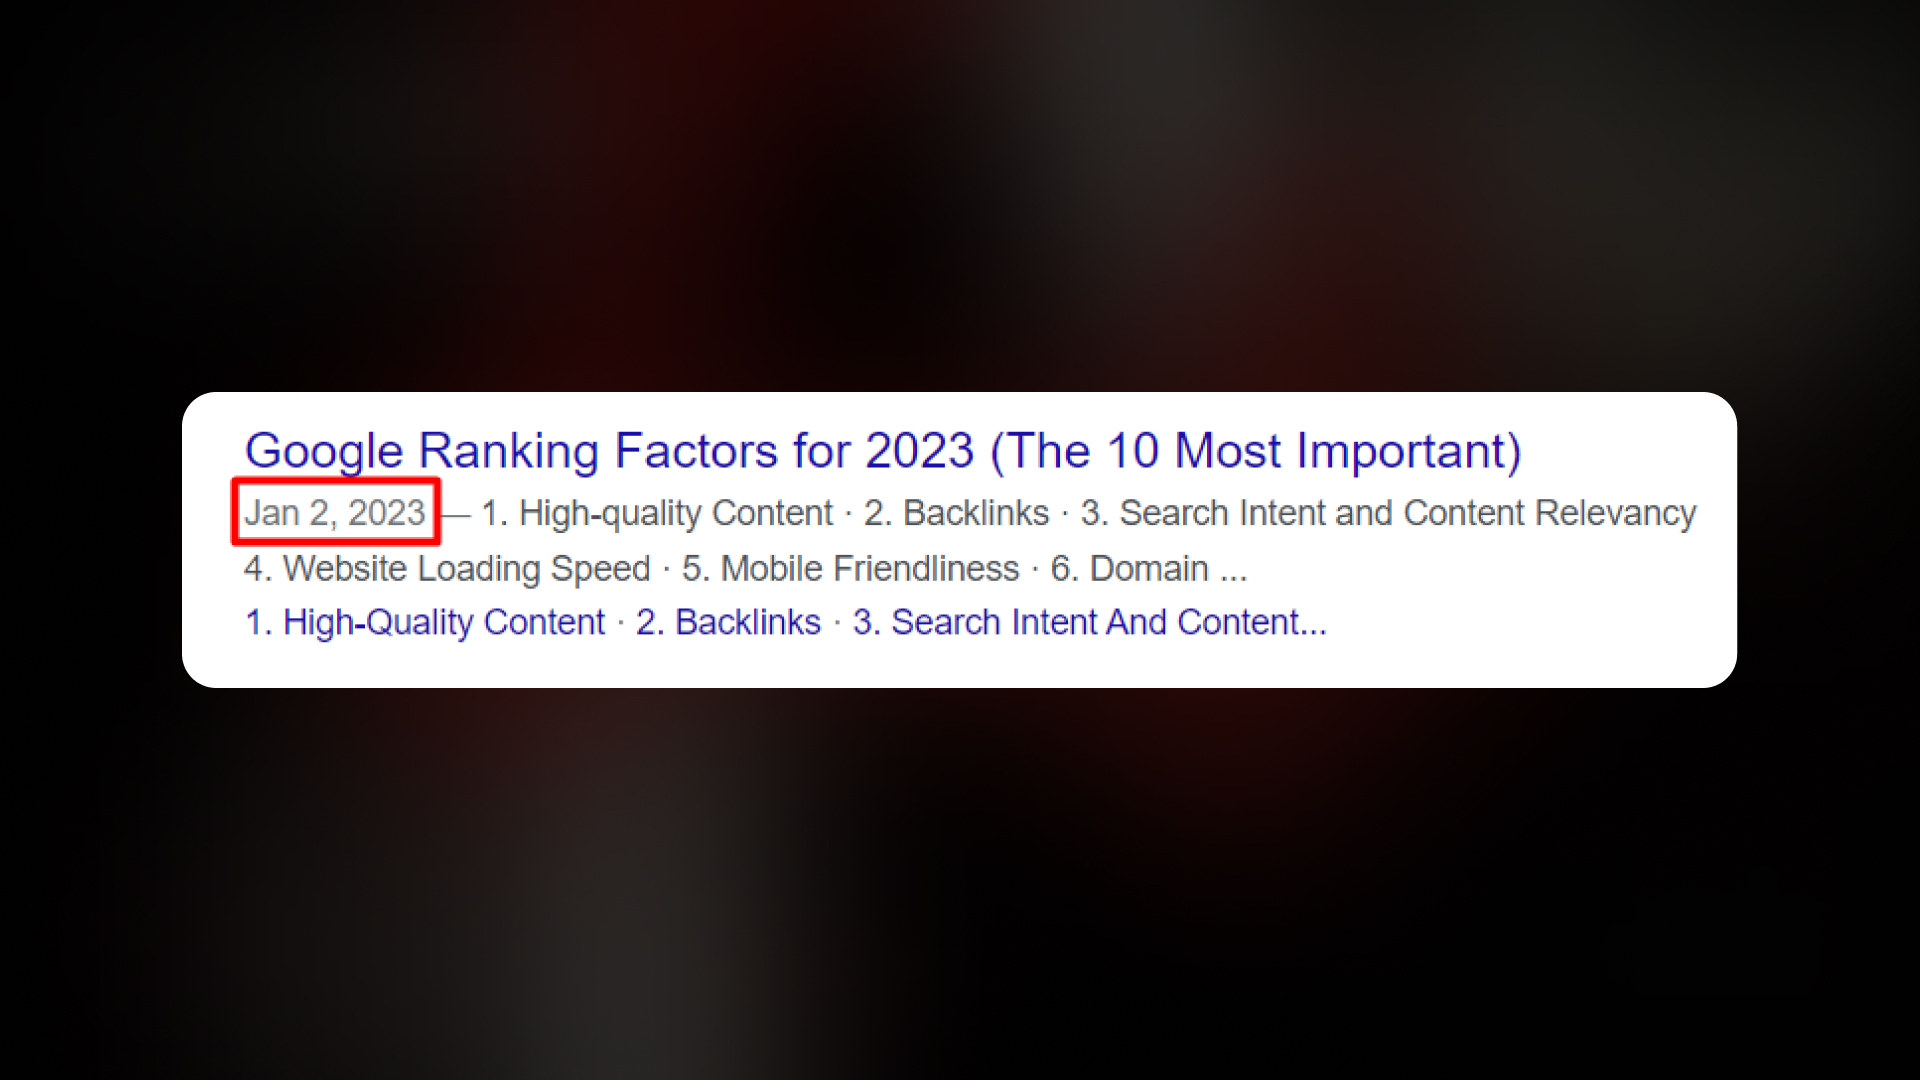 Content update in the SERP